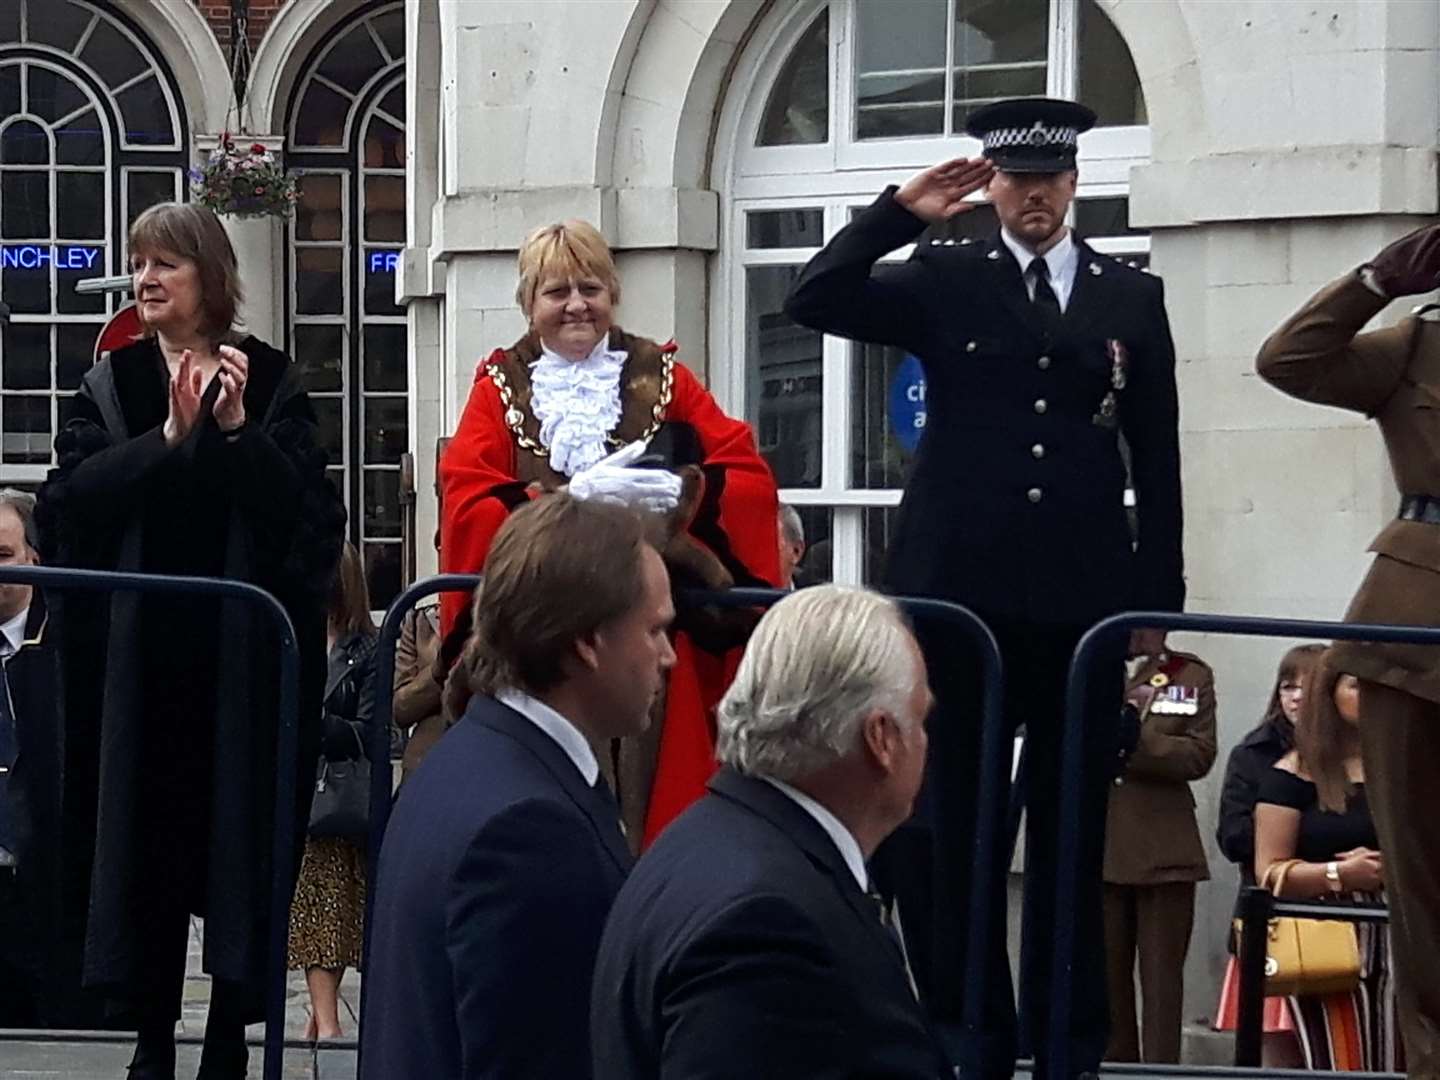 The Mayor takes the salute